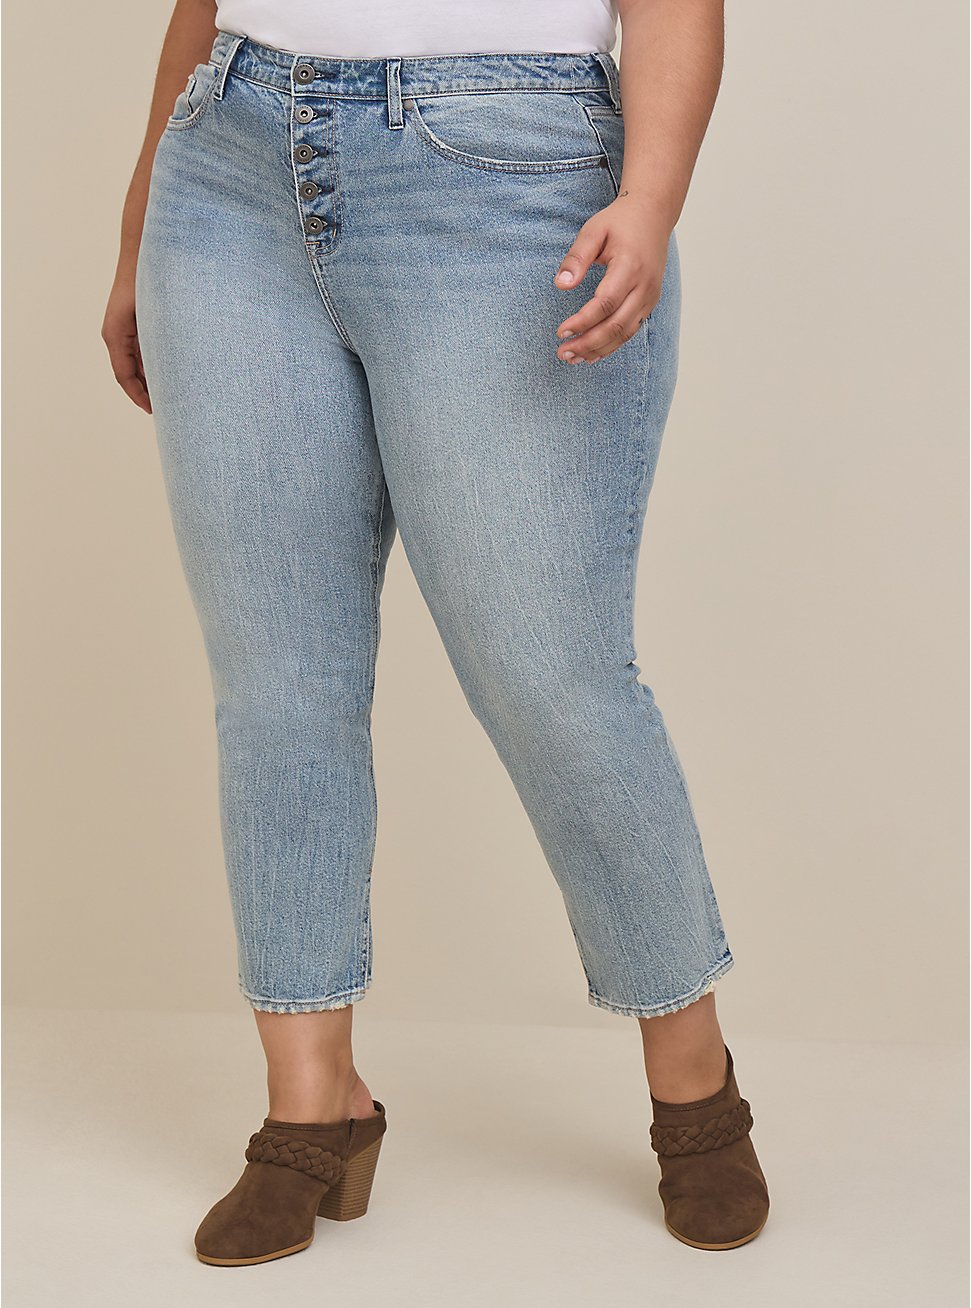 Plus Size Straight Classic Denim High-Rise Jean, STRAIGHT UP, hi-res